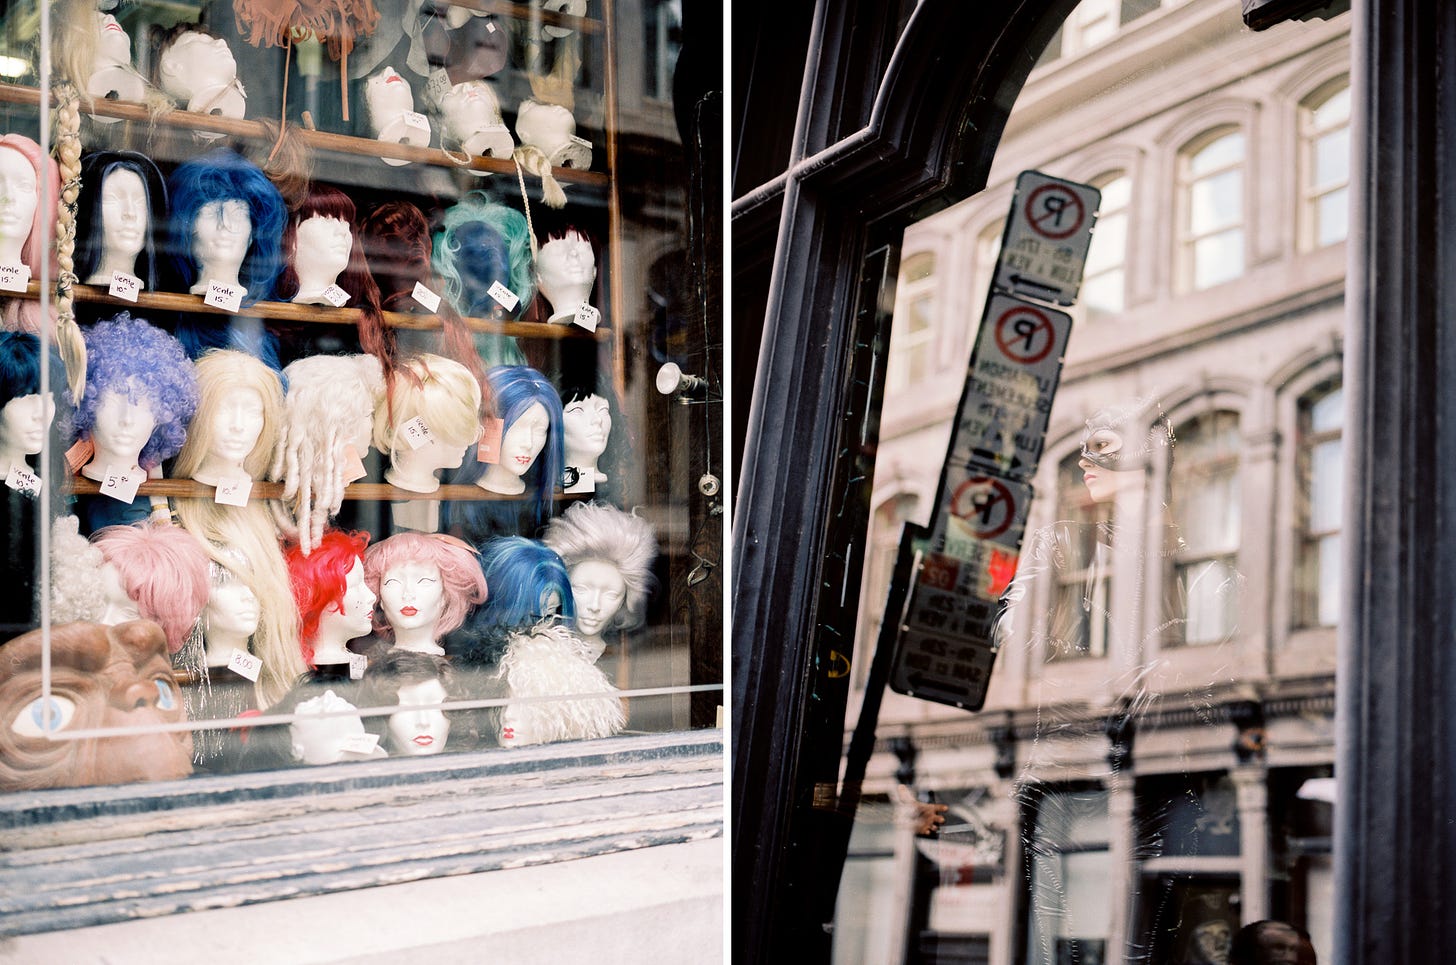 Photo diptych with scenes from Quebec shop windows